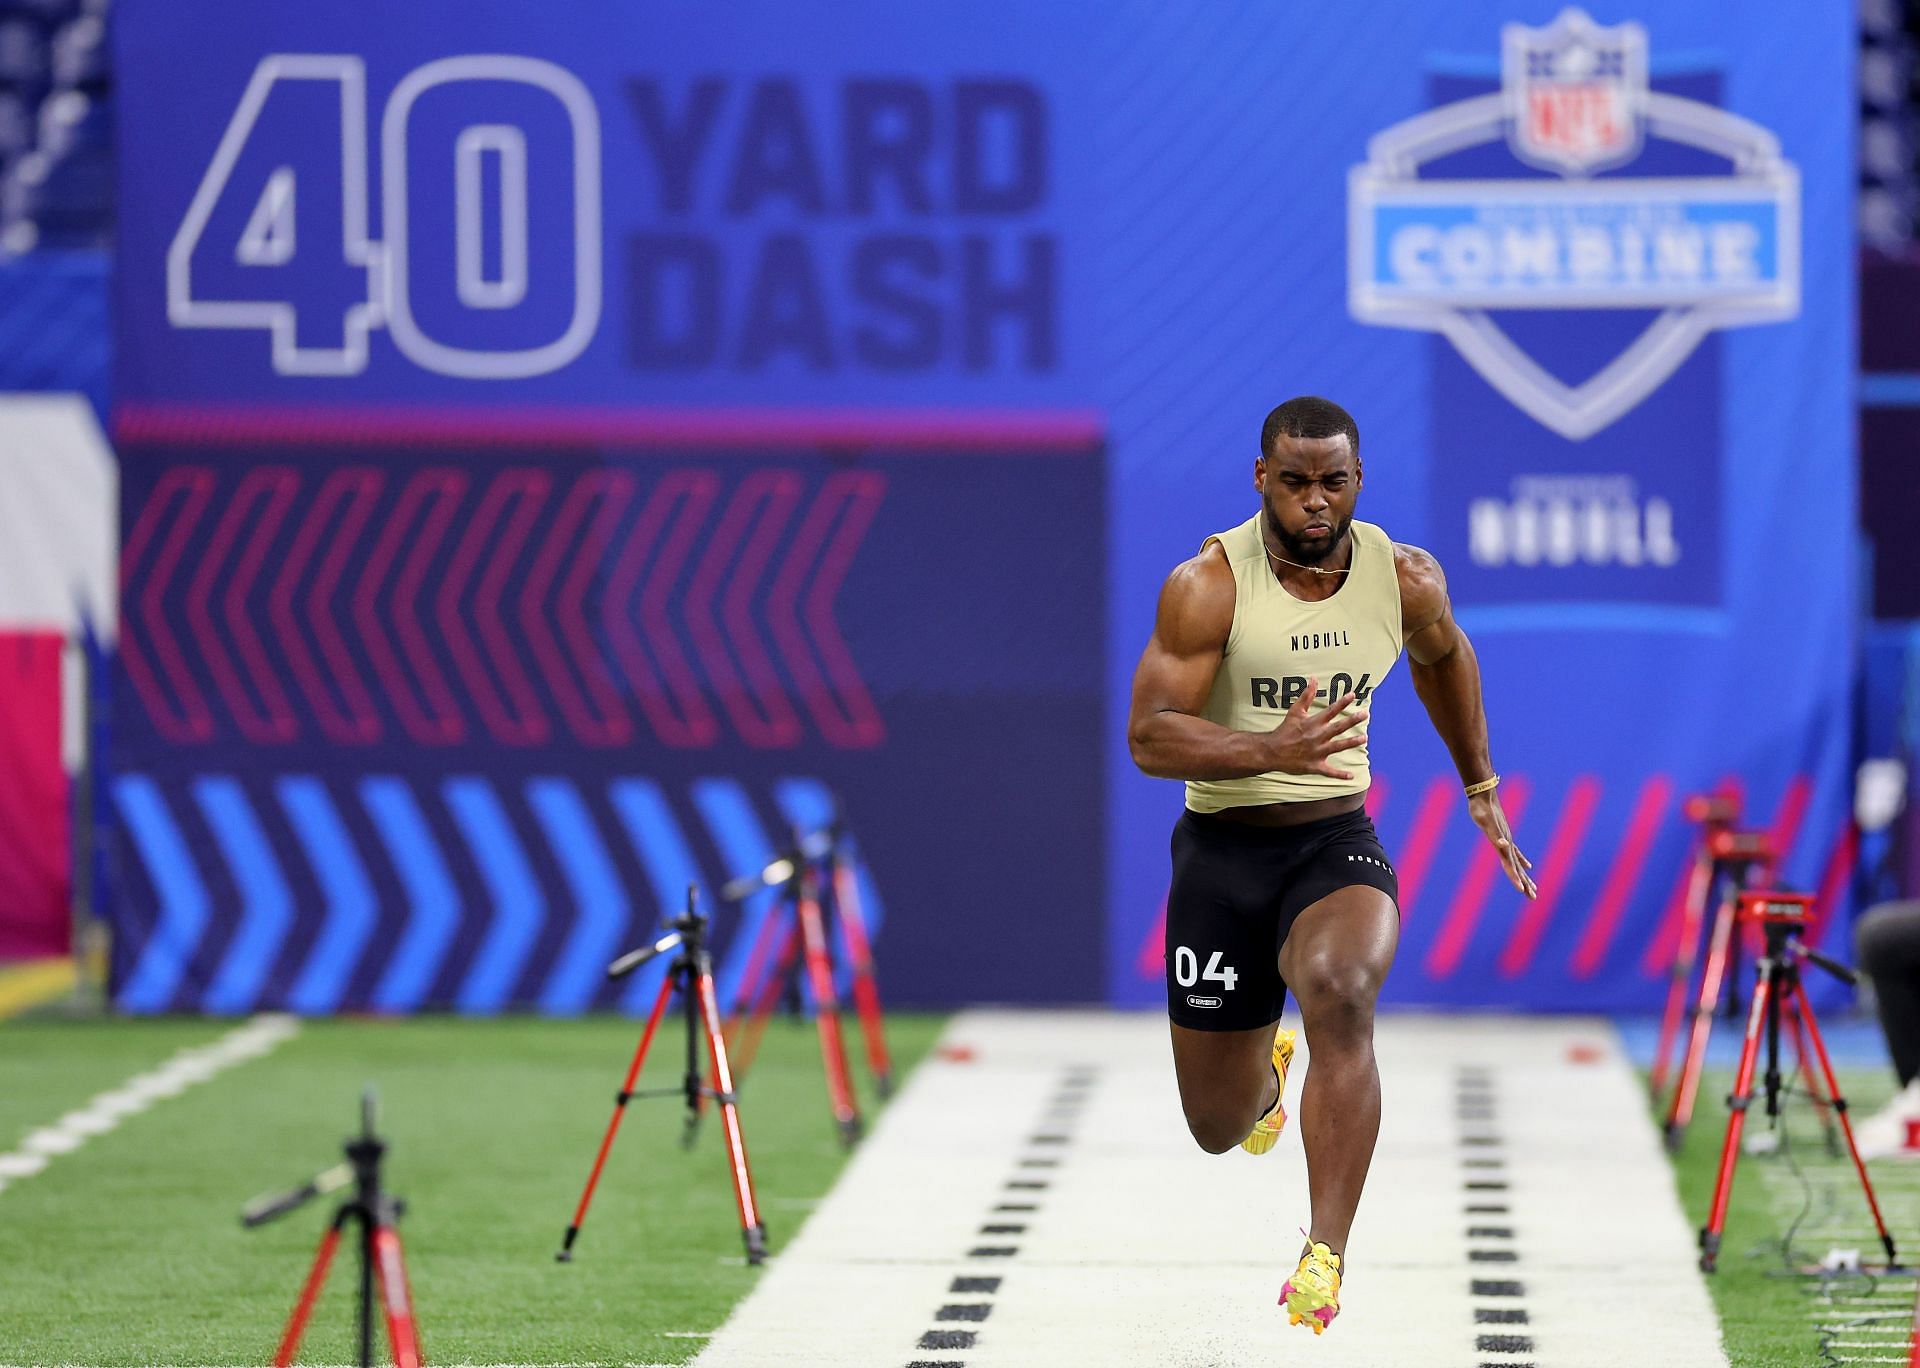 Trey Benson #RB04 of Florida State participates in the 40-yard dash during the NFL Combine